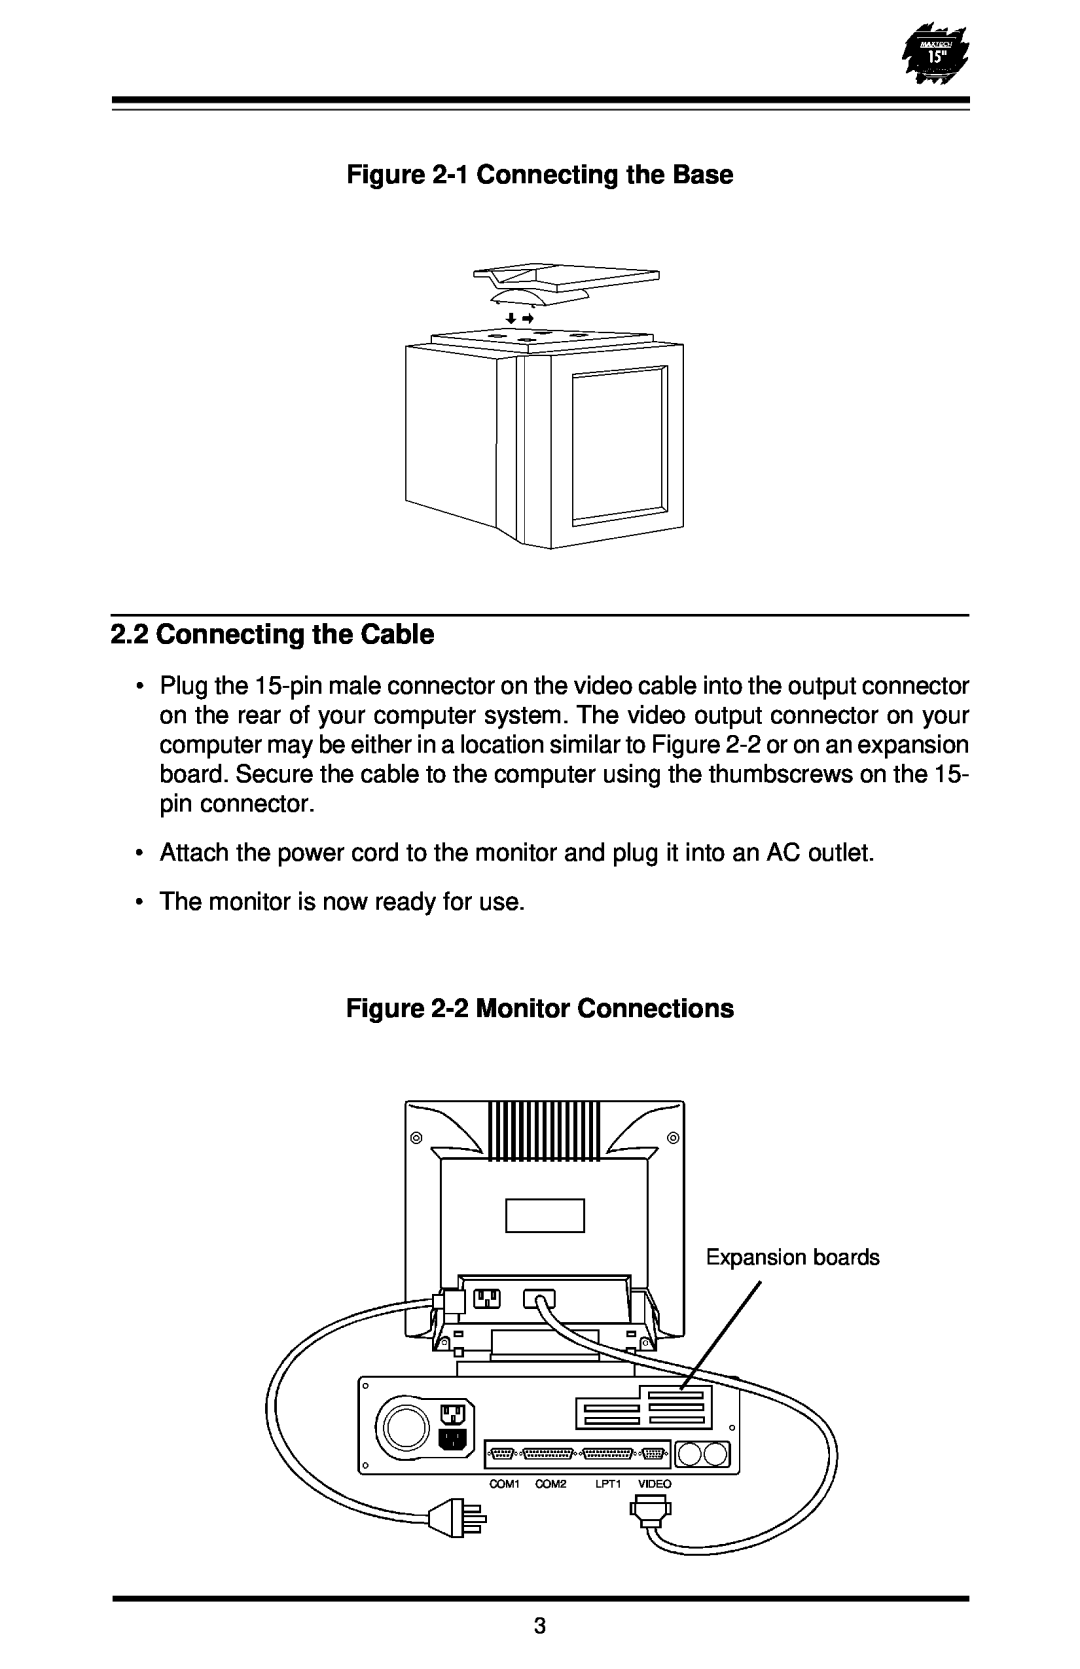 MaxTech XT-5871 user manual 1 Connecting the Base 2.2 Connecting the Cable, 2 Monitor Connections 